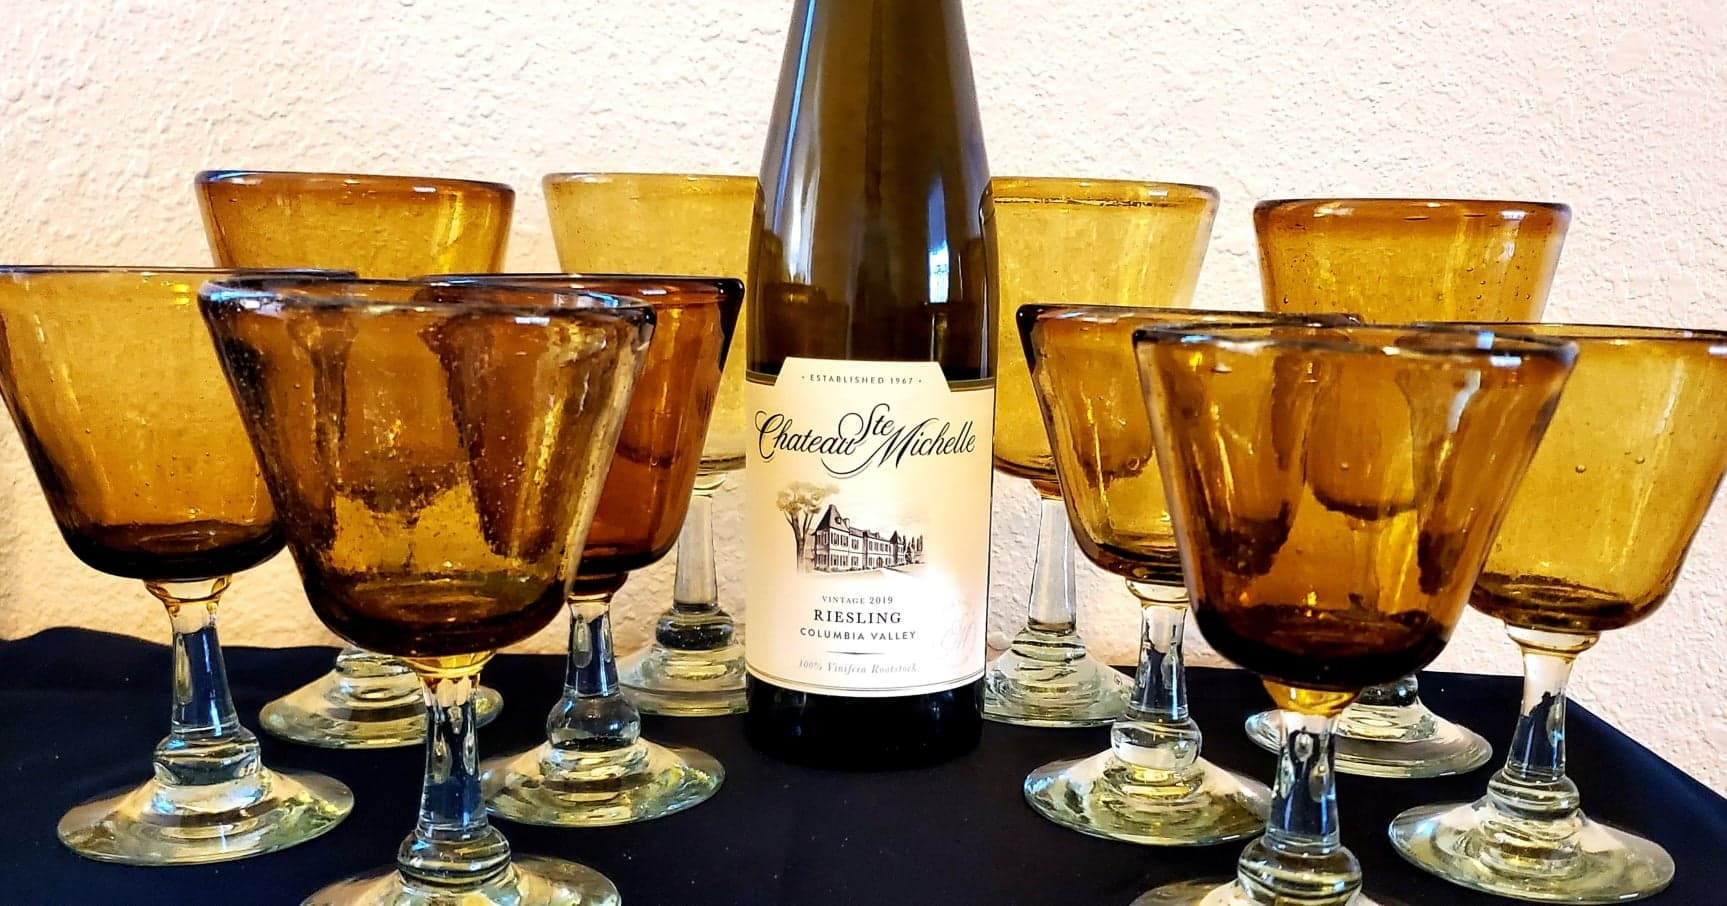 2 sets of vintage yellow wine glasses from Pier-1 Imports and Riesling - Columbia Valley 2019